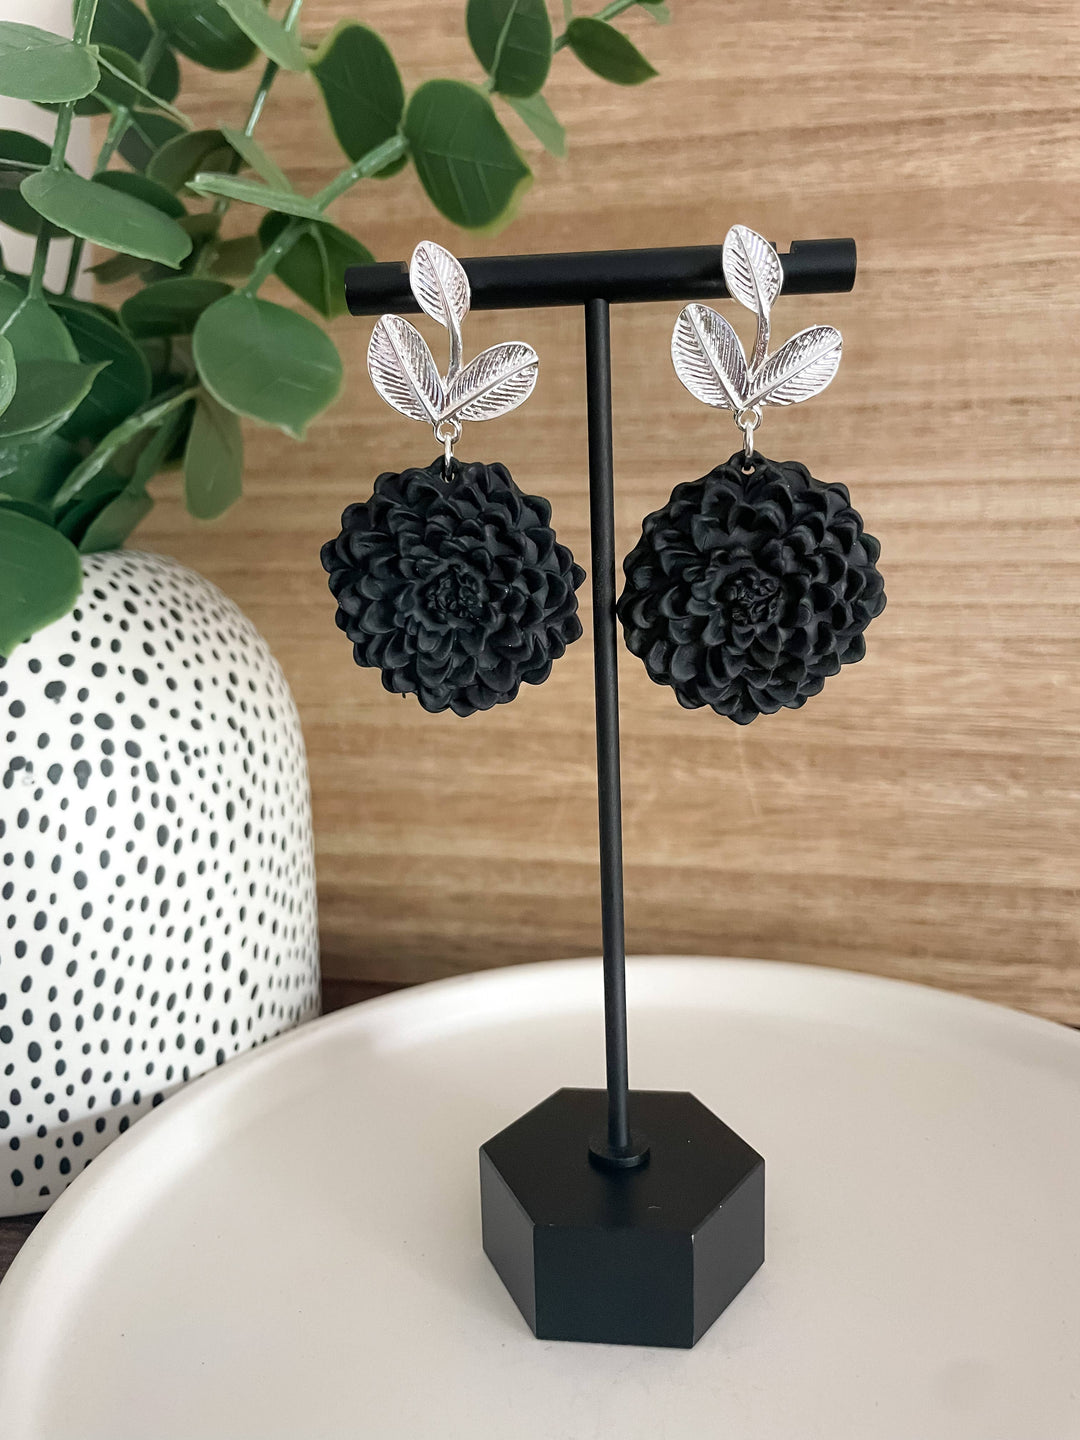 Black Chrysanthemum Clay Dangles Earrings-Earrings-Inspired by Justeen-Women's Clothing Boutique in Chicago, Illinois